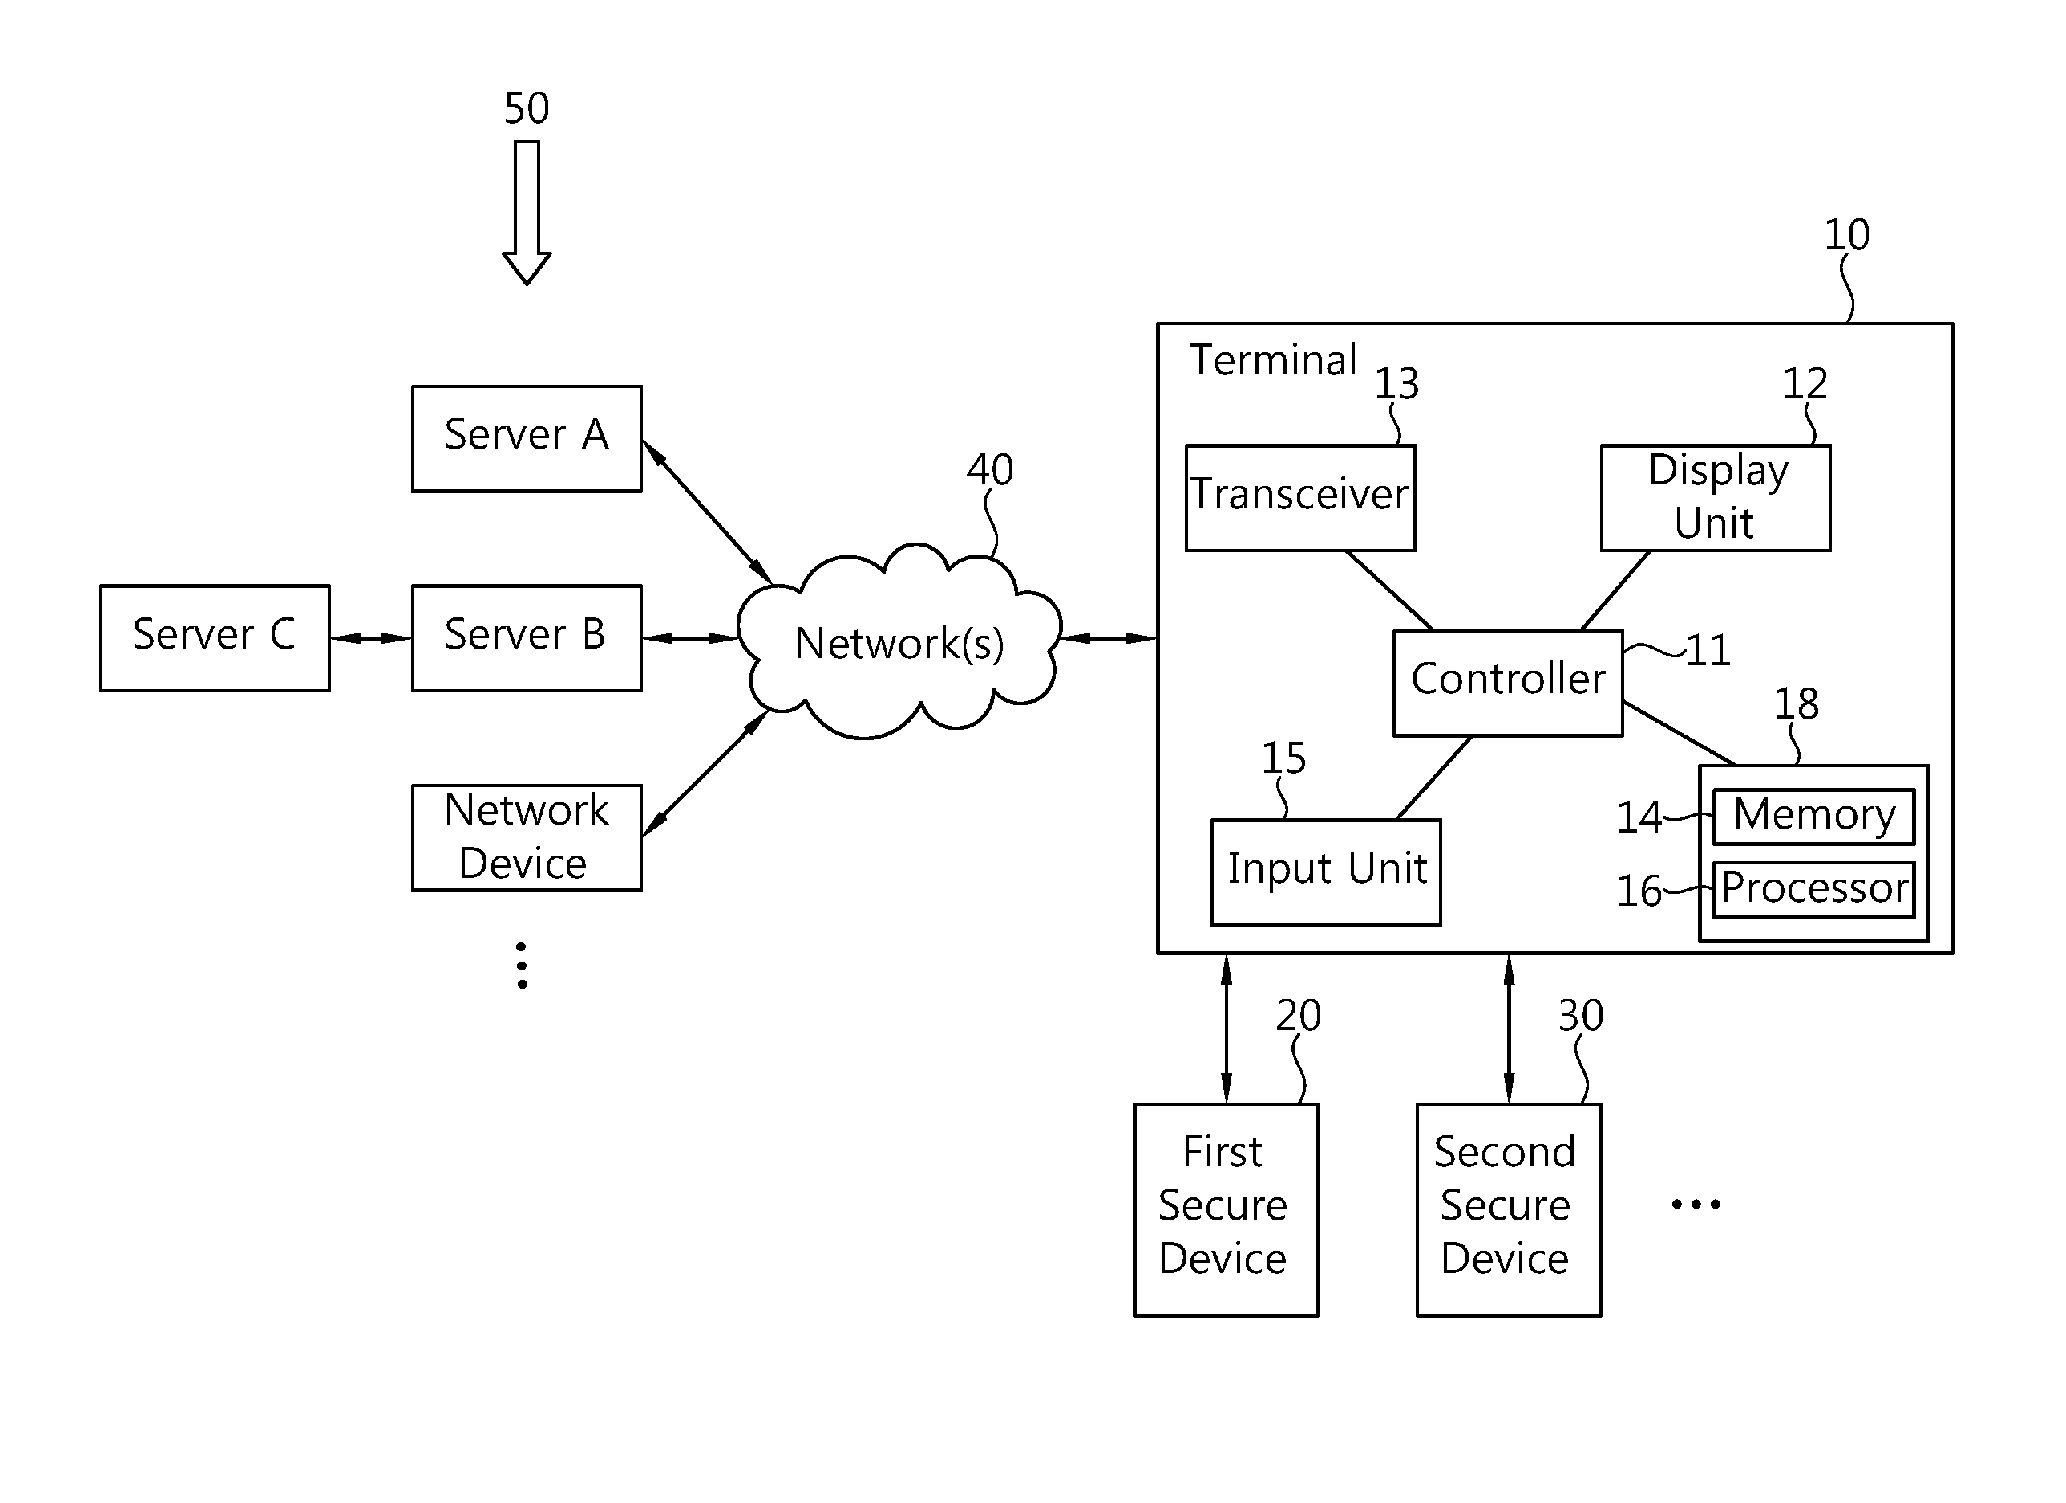 Terminal and method for managing secure devices